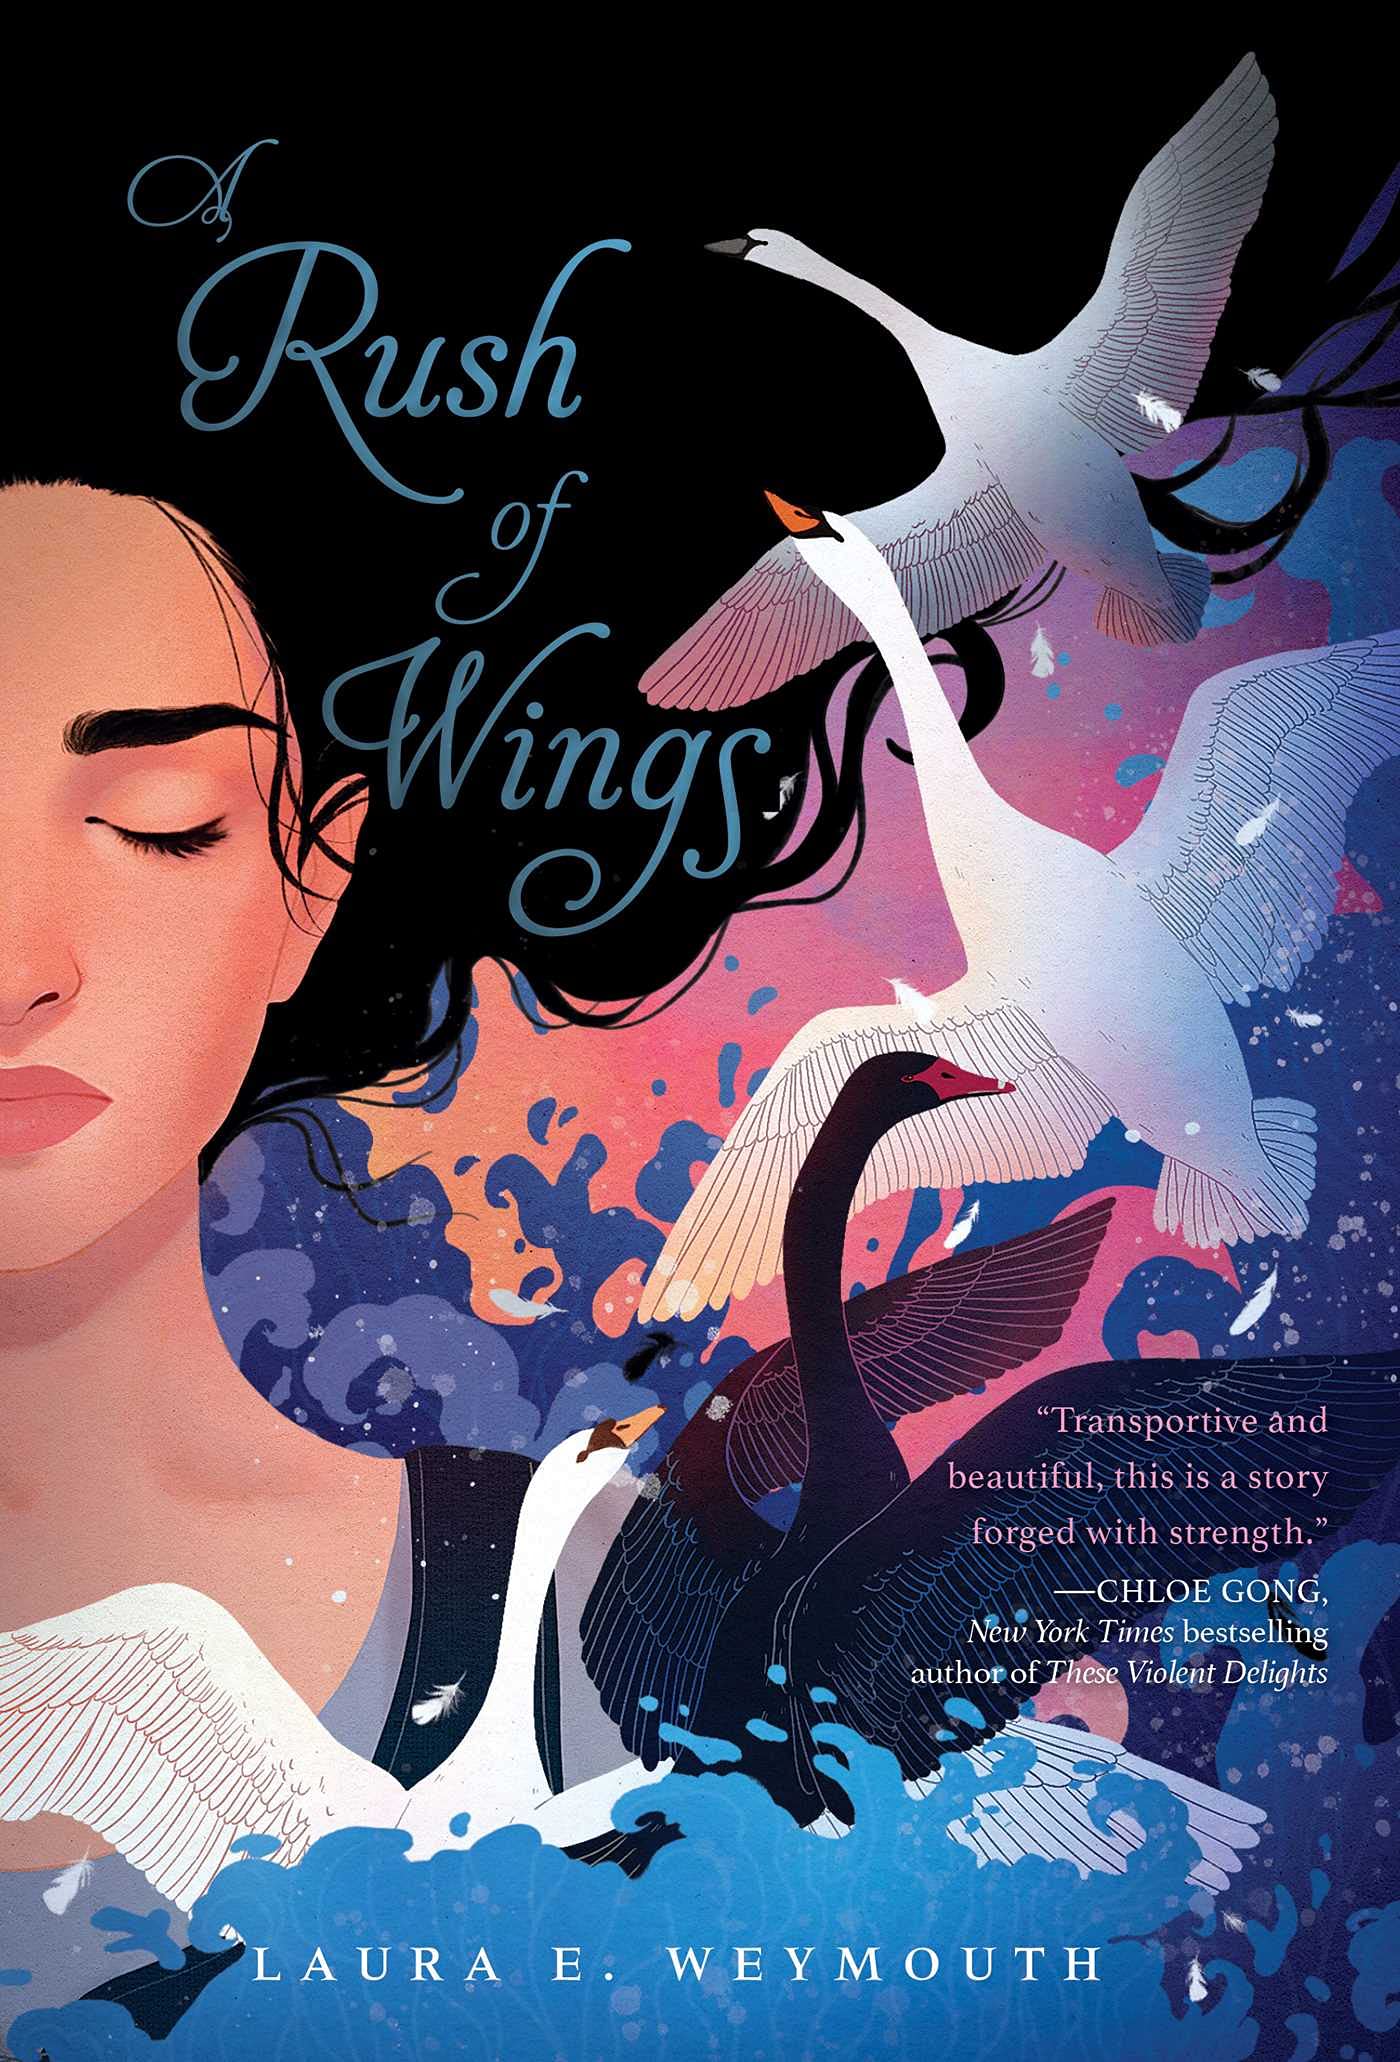 Image for "A Rush of Wings"